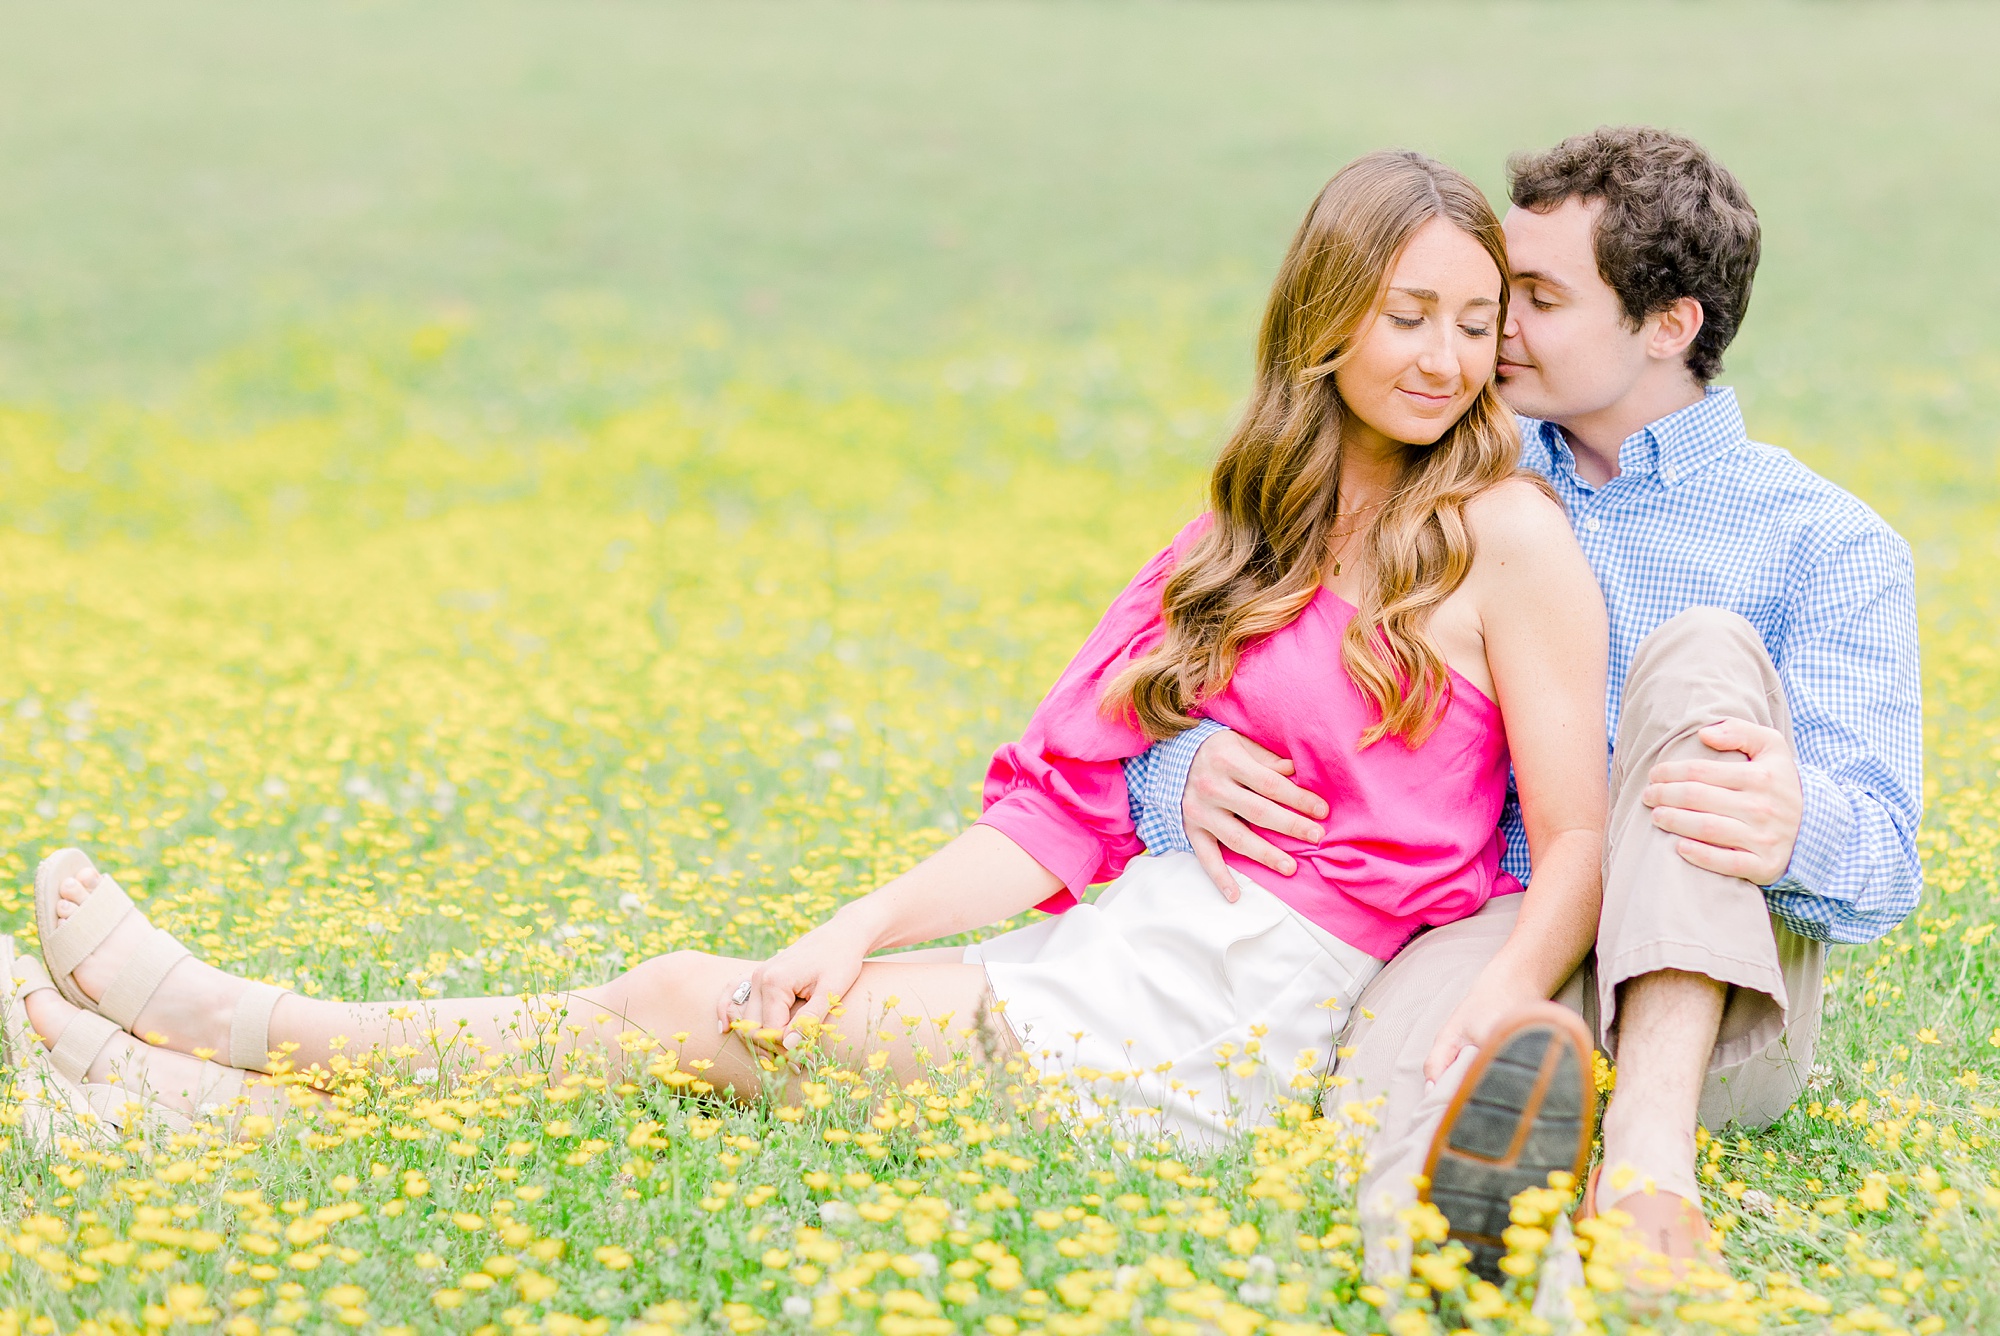 groom nuzzles bride's cheek during spring engagement photos in field